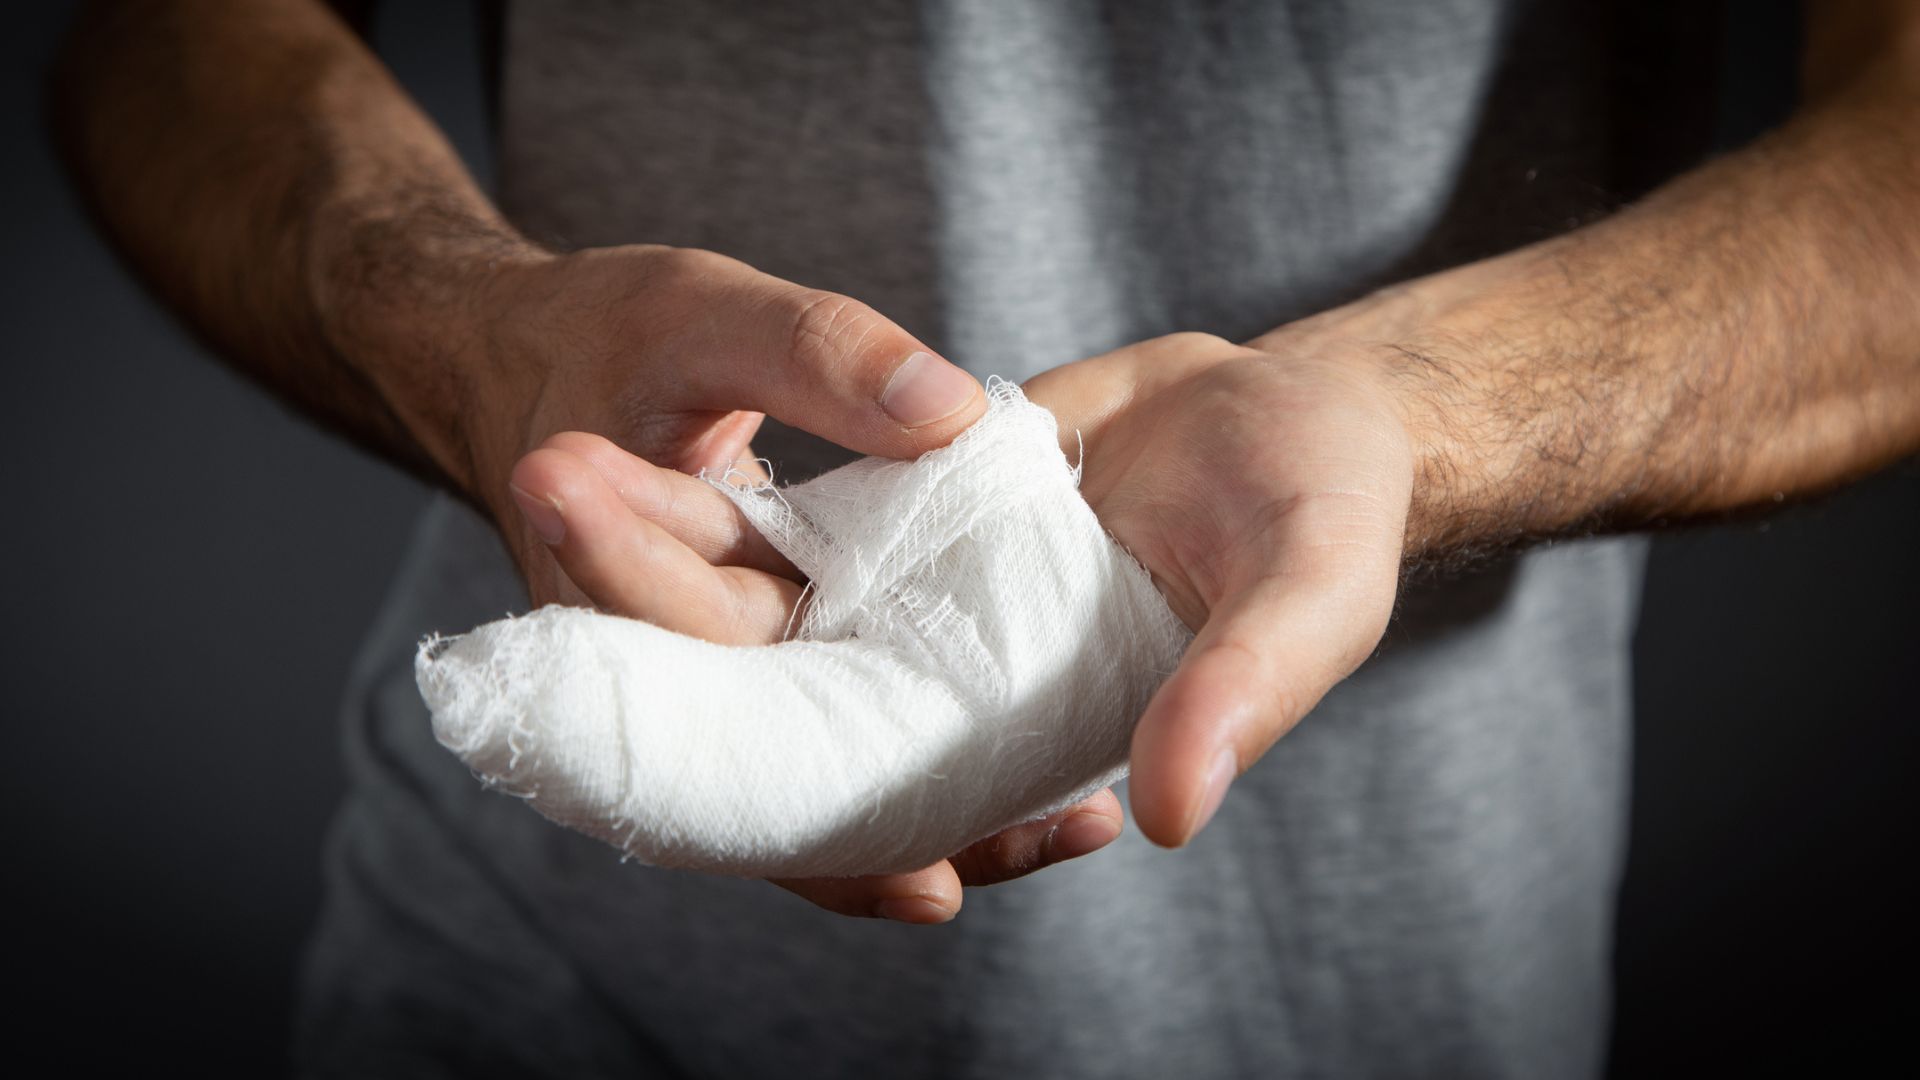 Man with bandage in injured hand